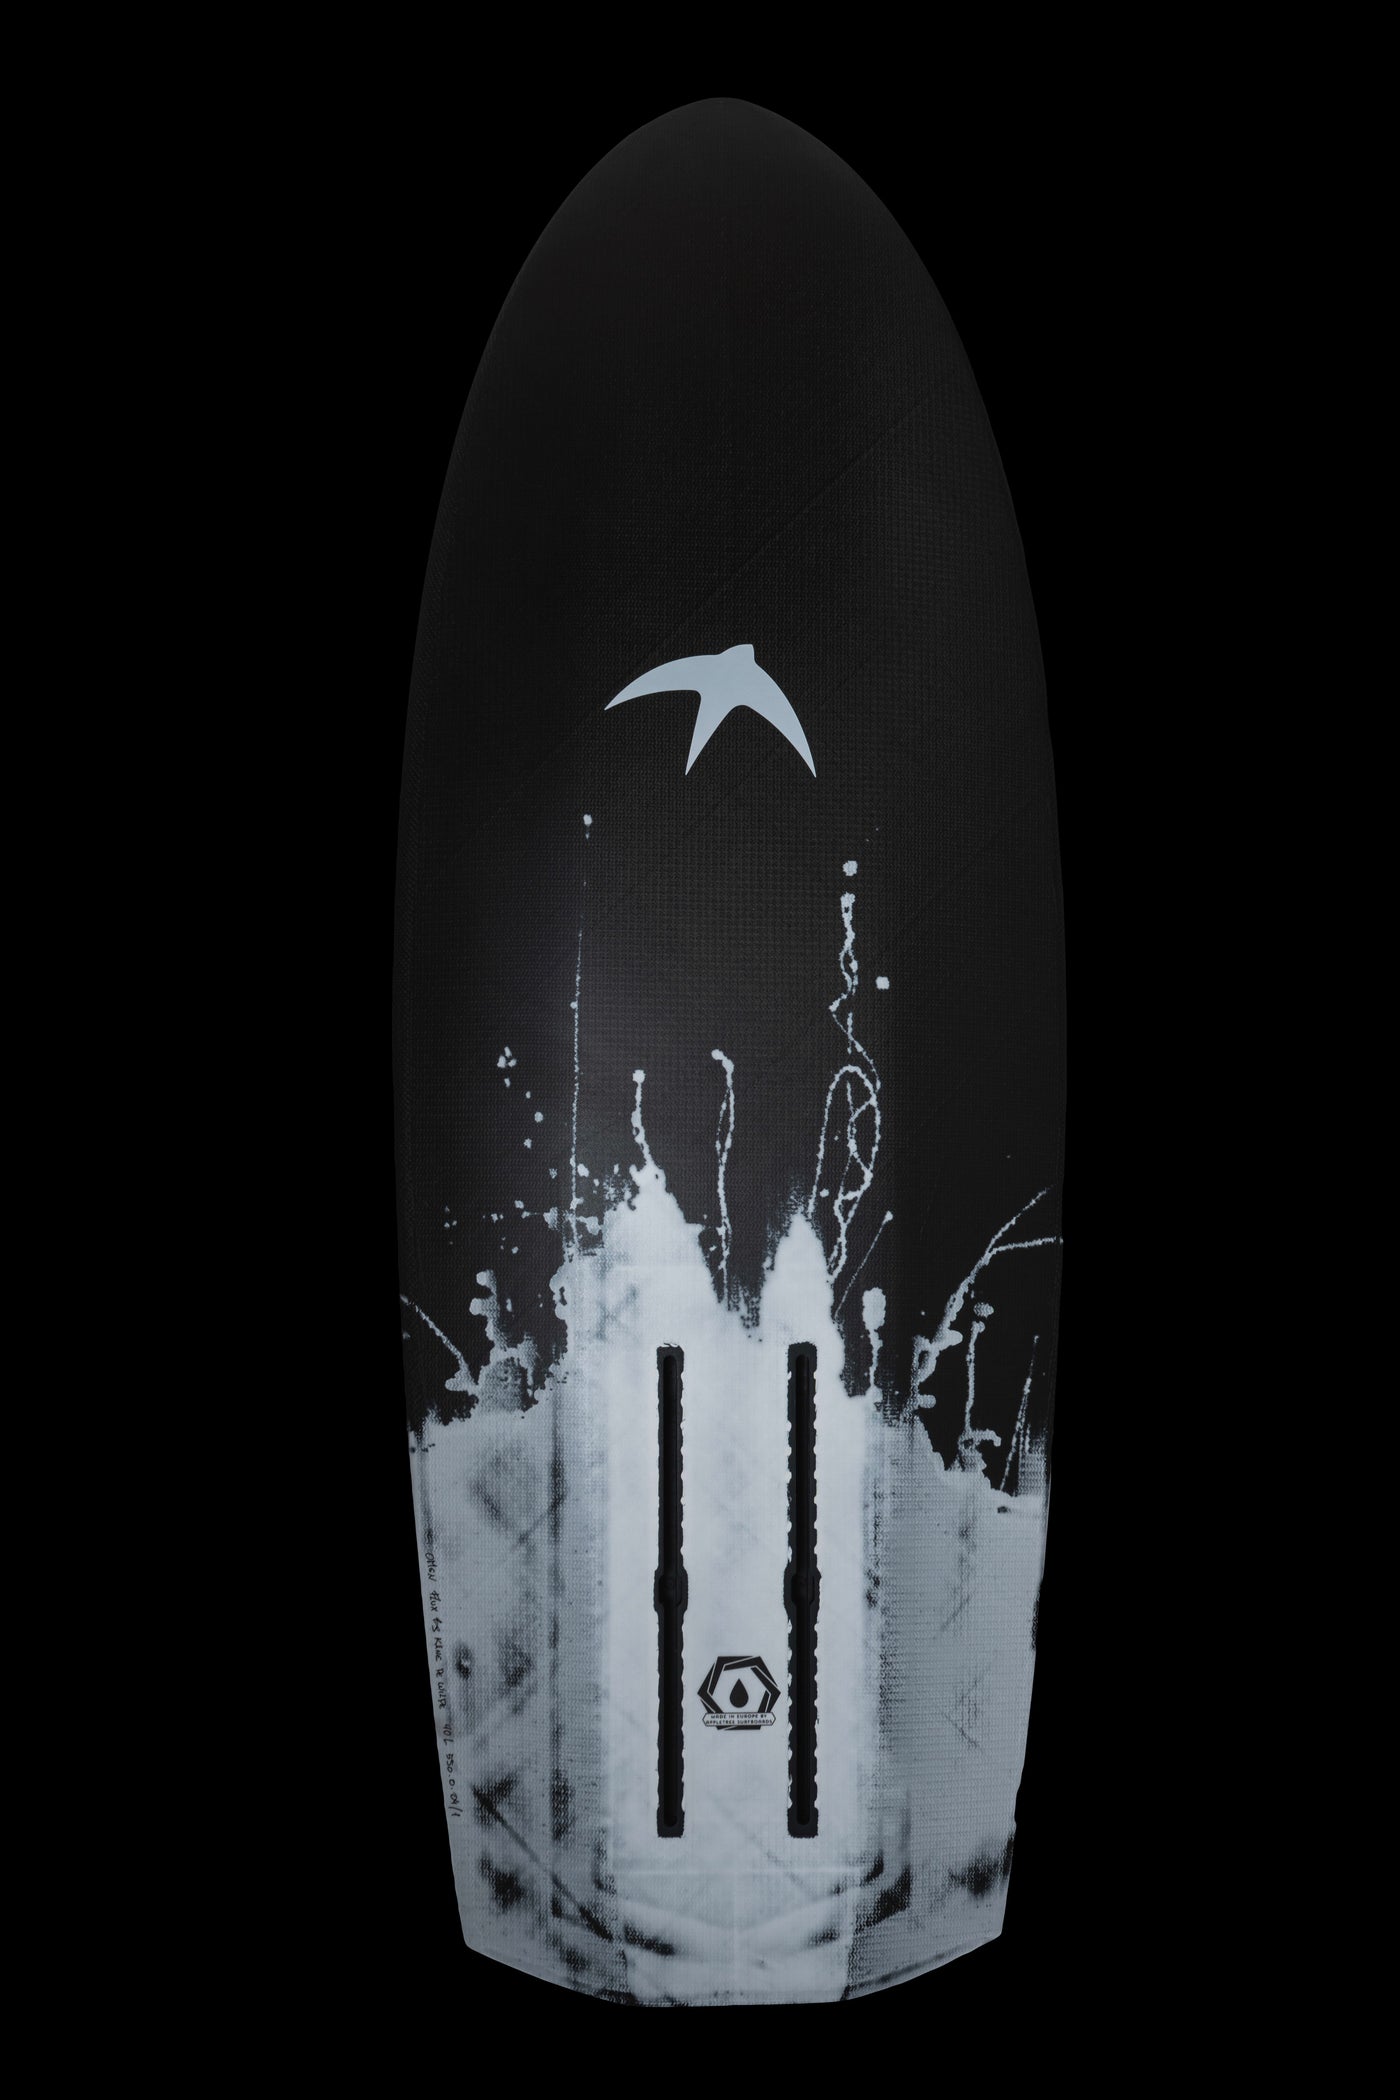 Omen Flux Board, 40L bottom semi displacement hull for efficiency, low end and touchdown performance